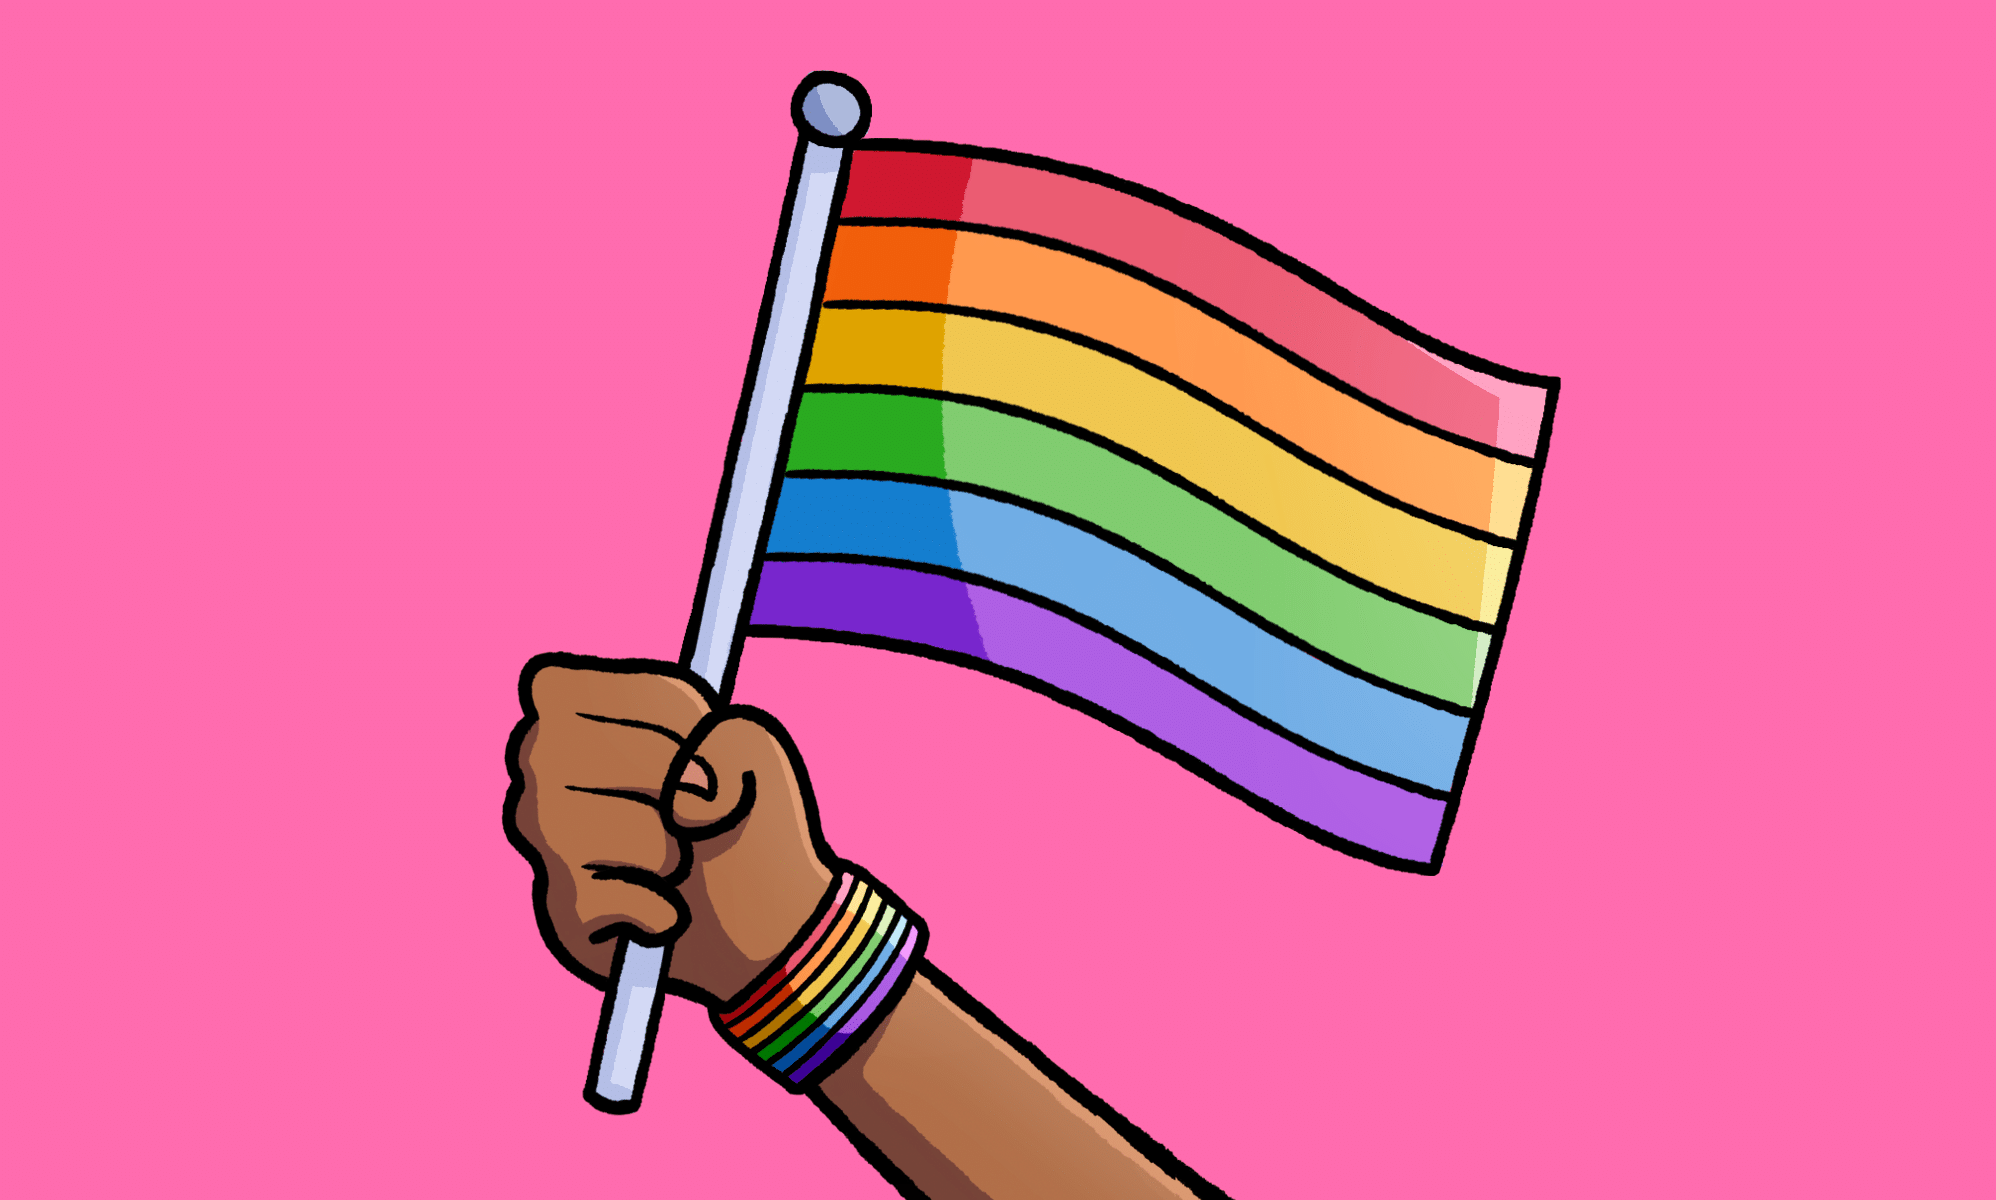 Facebook releases free Pride-themed sticker set